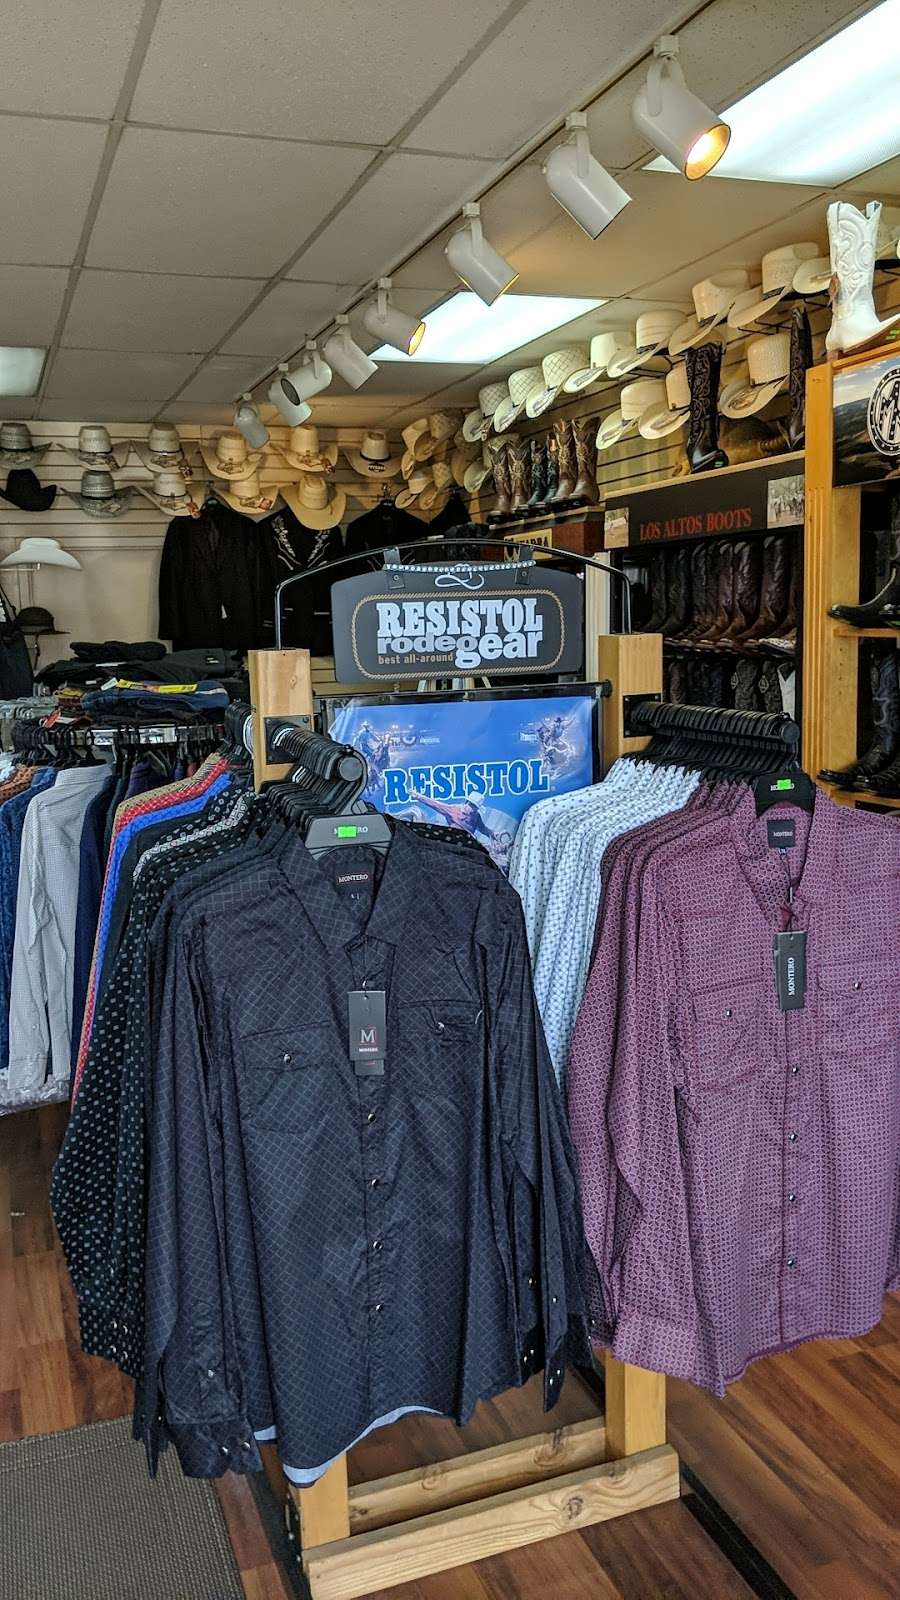 El Ranchero Western Wear - clothing store  | Photo 4 of 8 | Address: 395 S King Rd Suite A, San Jose, CA 95116, USA | Phone: (408) 937-5530